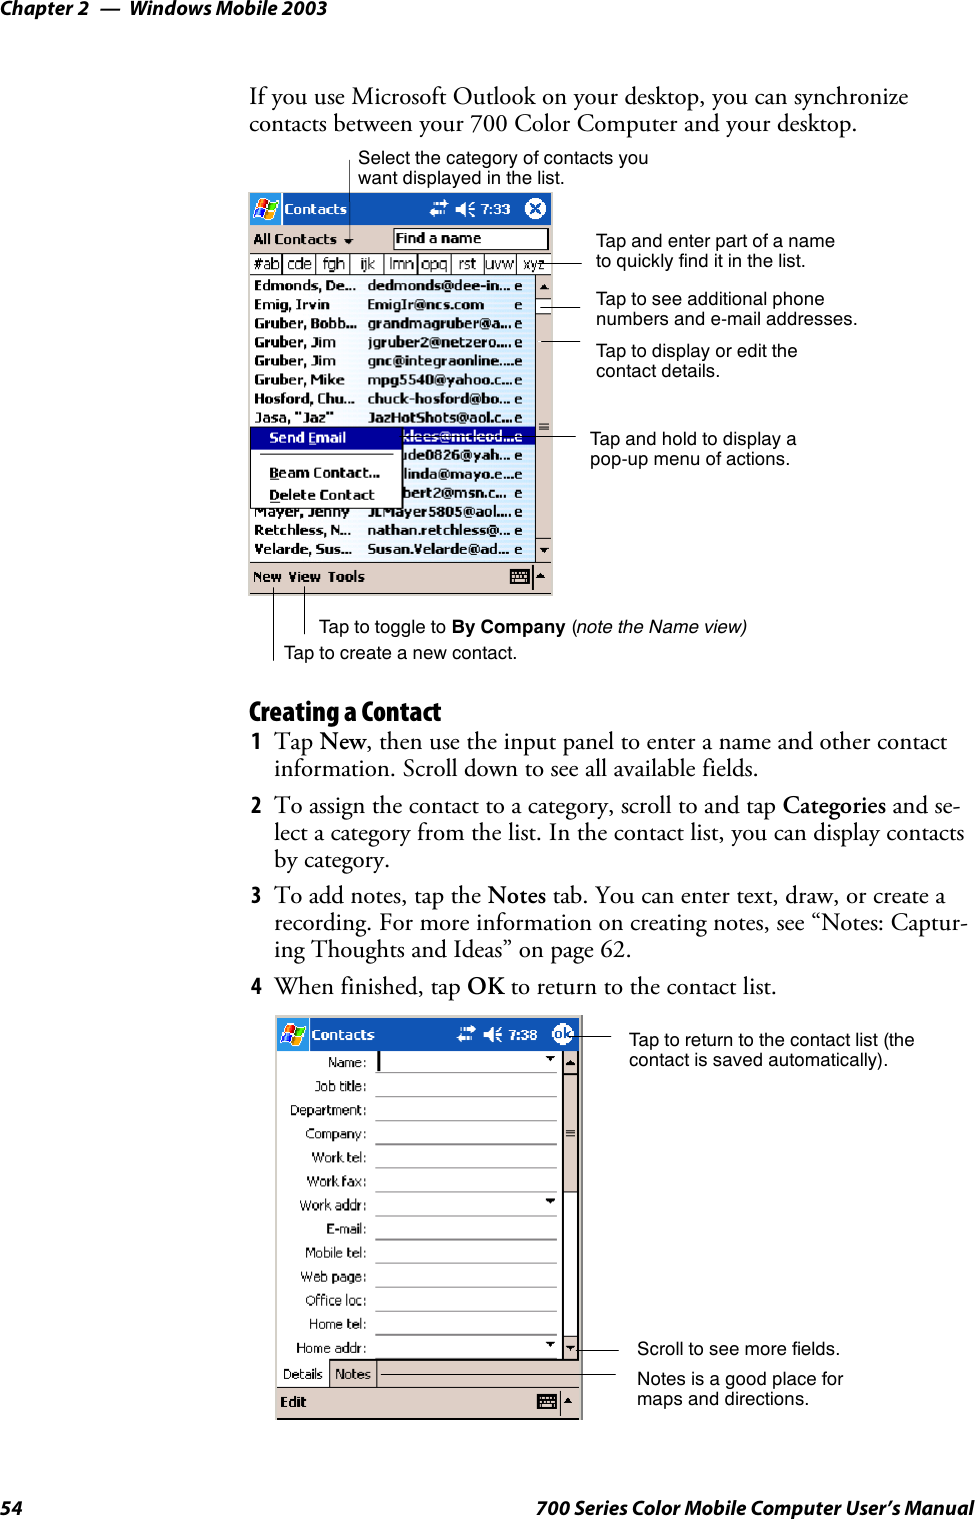 Windows Mobile 2003Chapter —254 700 Series Color Mobile Computer User’s ManualIf you use Microsoft Outlook on your desktop, you can synchronizecontacts between your 700 Color Computer and your desktop.Tap and enter part of a nameto quickly find it in the list.Tap to create a new contact.Select the category of contacts youwant displayed in the list.Tap to see additional phonenumbers and e-mail addresses.Tap to display or edit thecontact details.Tap and hold to display apop-up menu of actions.Tap to toggle to By Company (note the Name view)Creating a Contact1Tap New, then use the input panel to enter a name and other contactinformation. Scroll down to see all available fields.2To assign the contact to a category, scroll to and tap Categories and se-lect a category from the list. In the contact list, you can display contactsby category.3To add notes, tap the Notes tab. You can enter text, draw, or create arecording. For more information on creating notes, see “Notes: Captur-ing Thoughts and Ideas” on page 62.4When finished, tap OK to return to the contact list.Tap to return to the contact list (thecontact is saved automatically).Scroll to see more fields.Notes is a good place formaps and directions.